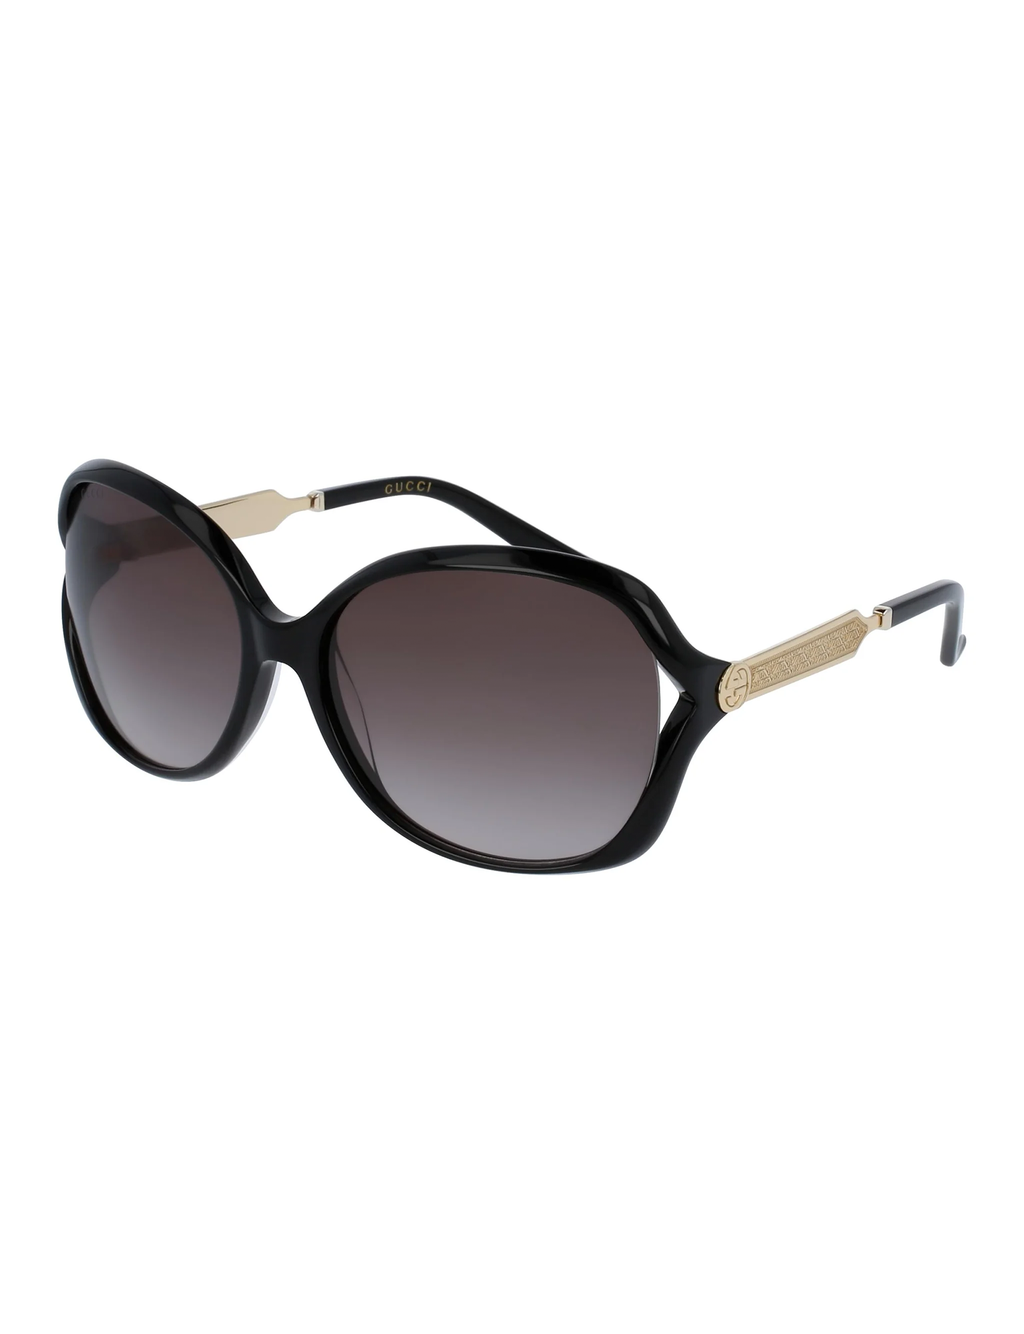 Butterfly Sunglasses, Black/Gold/Grey